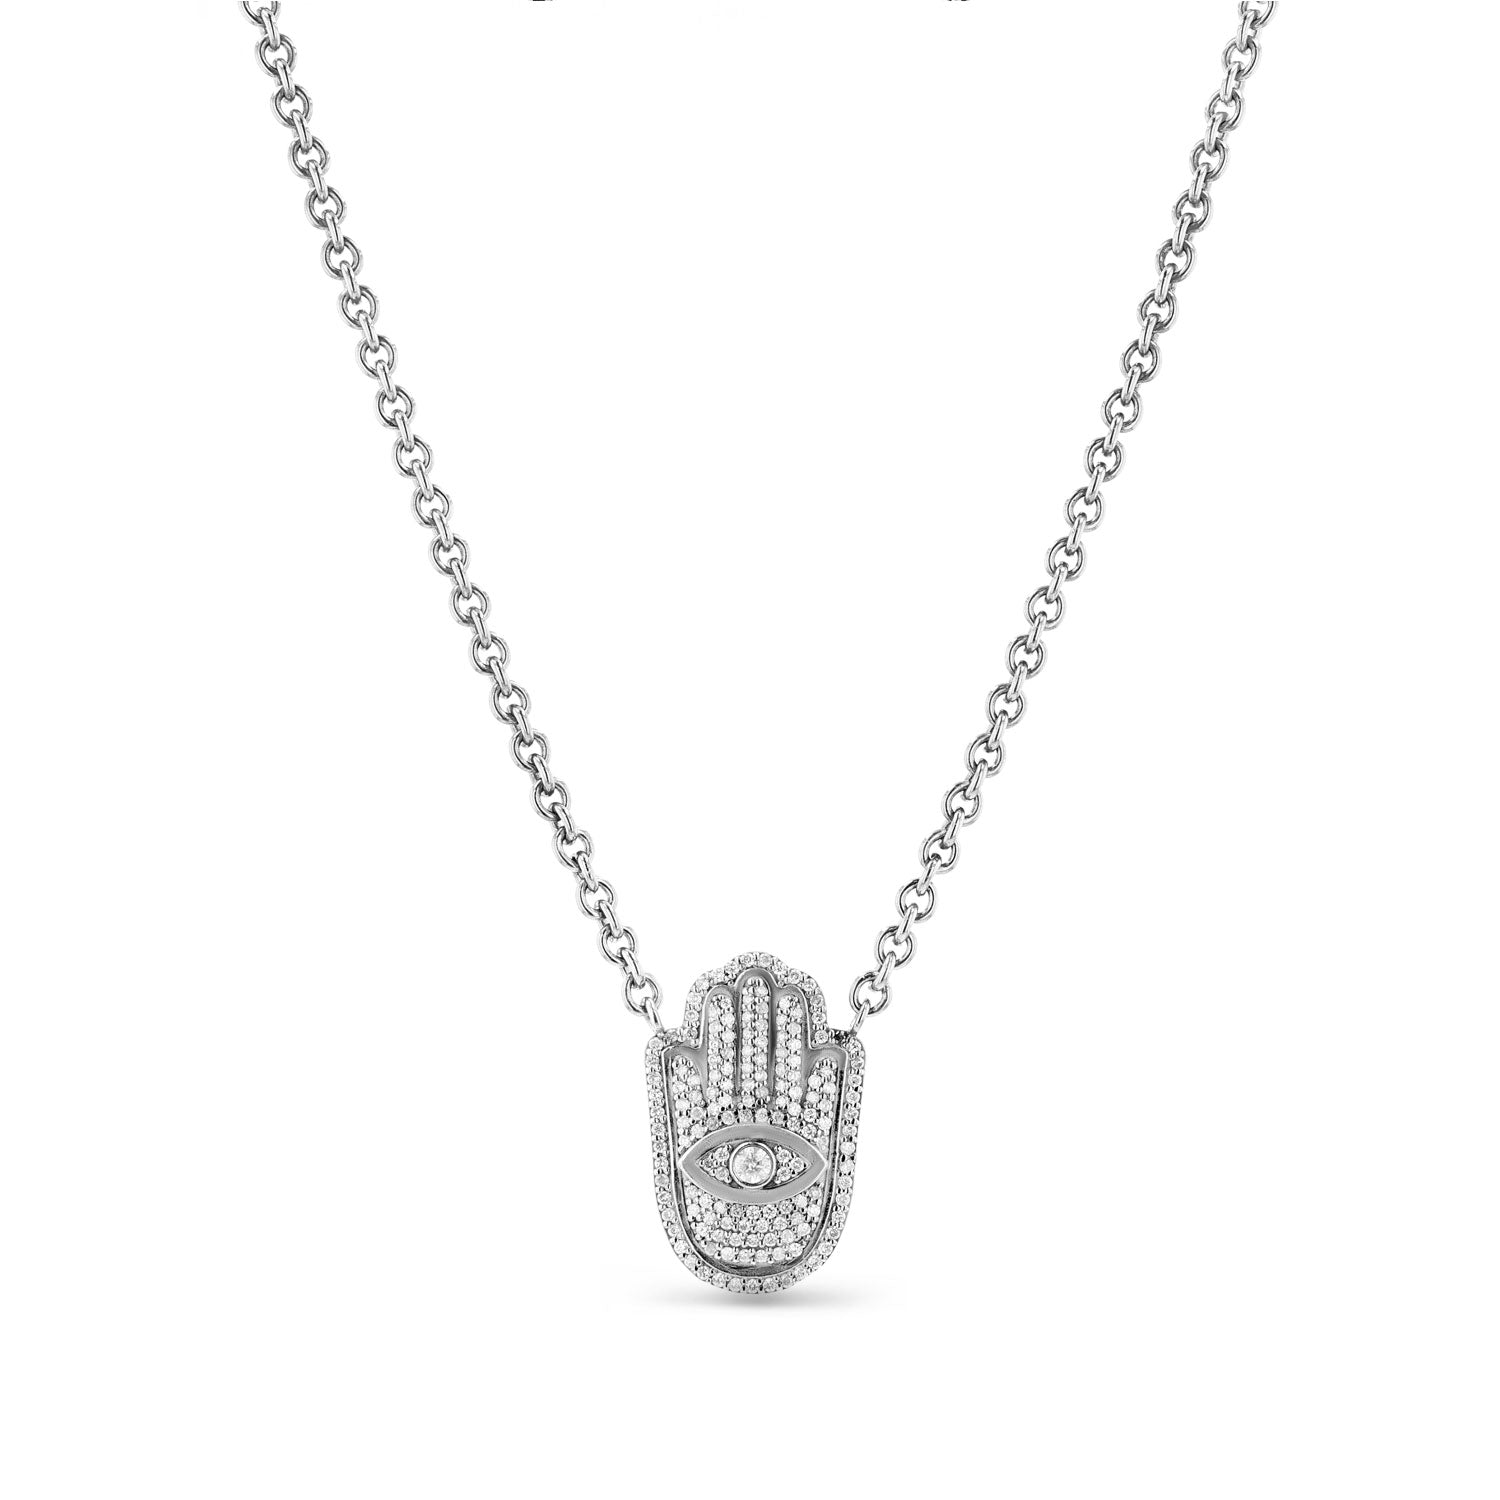 Diamond Hamsa with All Seeing Evil Eye Amulet Necklace N0002517 - TBird